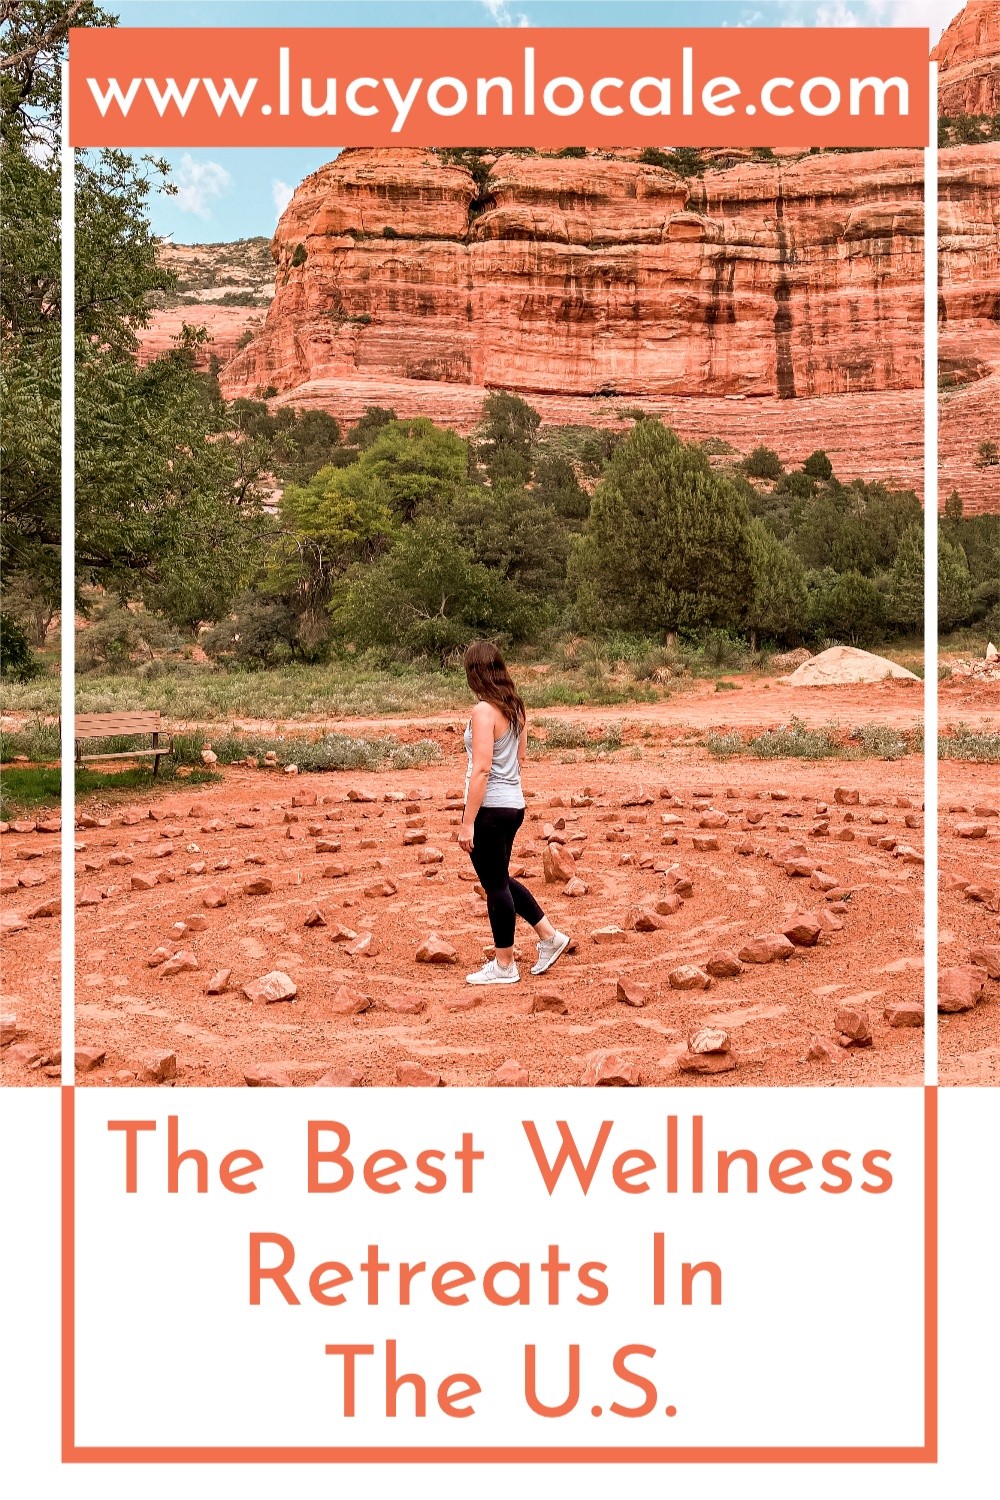 The best wellness retreats in the United States